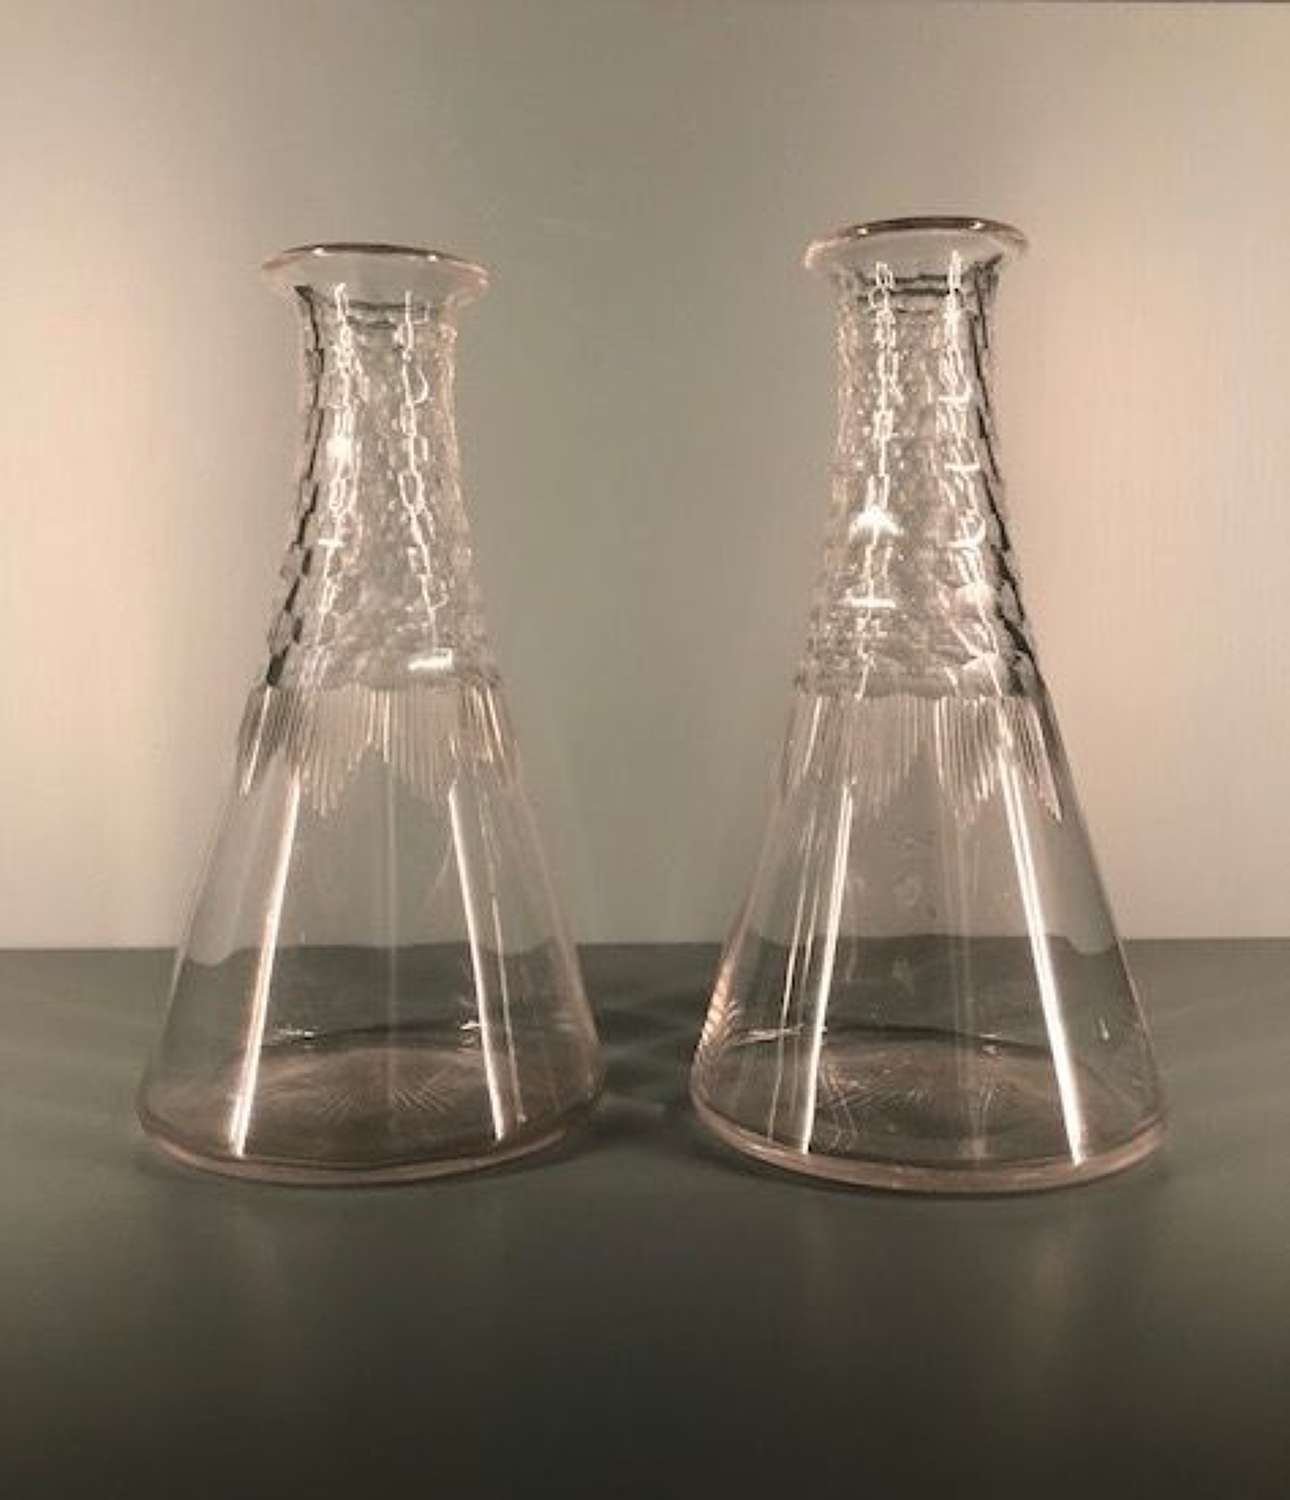 Pair of late 19th century carafes